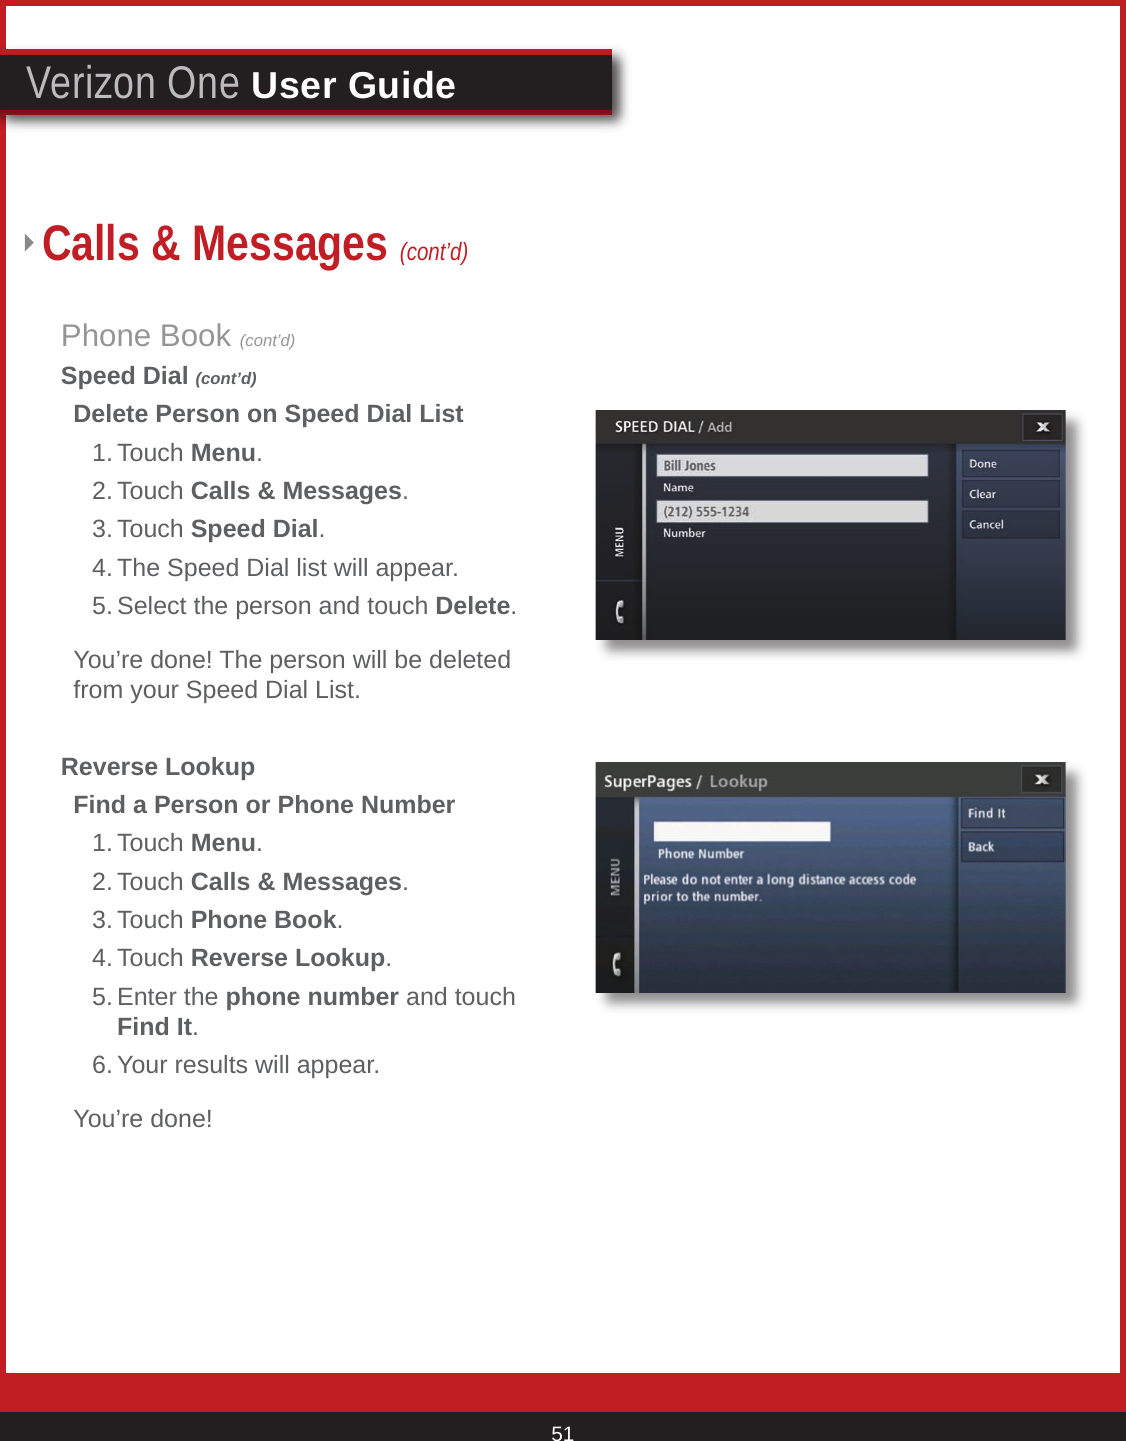 © 2007 Verizon. All Rights Reserved. 51Verizon One User GuidePhone Book (cont’d)Speed Dial (cont’d)  Delete Person on Speed Dial List    1. Touch Menu.   2. Touch Calls &amp; Messages.   3. Touch Speed Dial.   4. The Speed Dial list will appear.    5. Select the person and touch Delete.   You’re done! The person will be deleted    from your Speed Dial List.Reverse Lookup  Find a Person or Phone Number   1. Touch Menu.   2. Touch Calls &amp; Messages.   3. Touch Phone Book.   4. Touch Reverse Lookup.   5. Enter the phone number and touch        Find It.    6. Your results will appear.  You’re done!Calls &amp; Messages (cont’d)